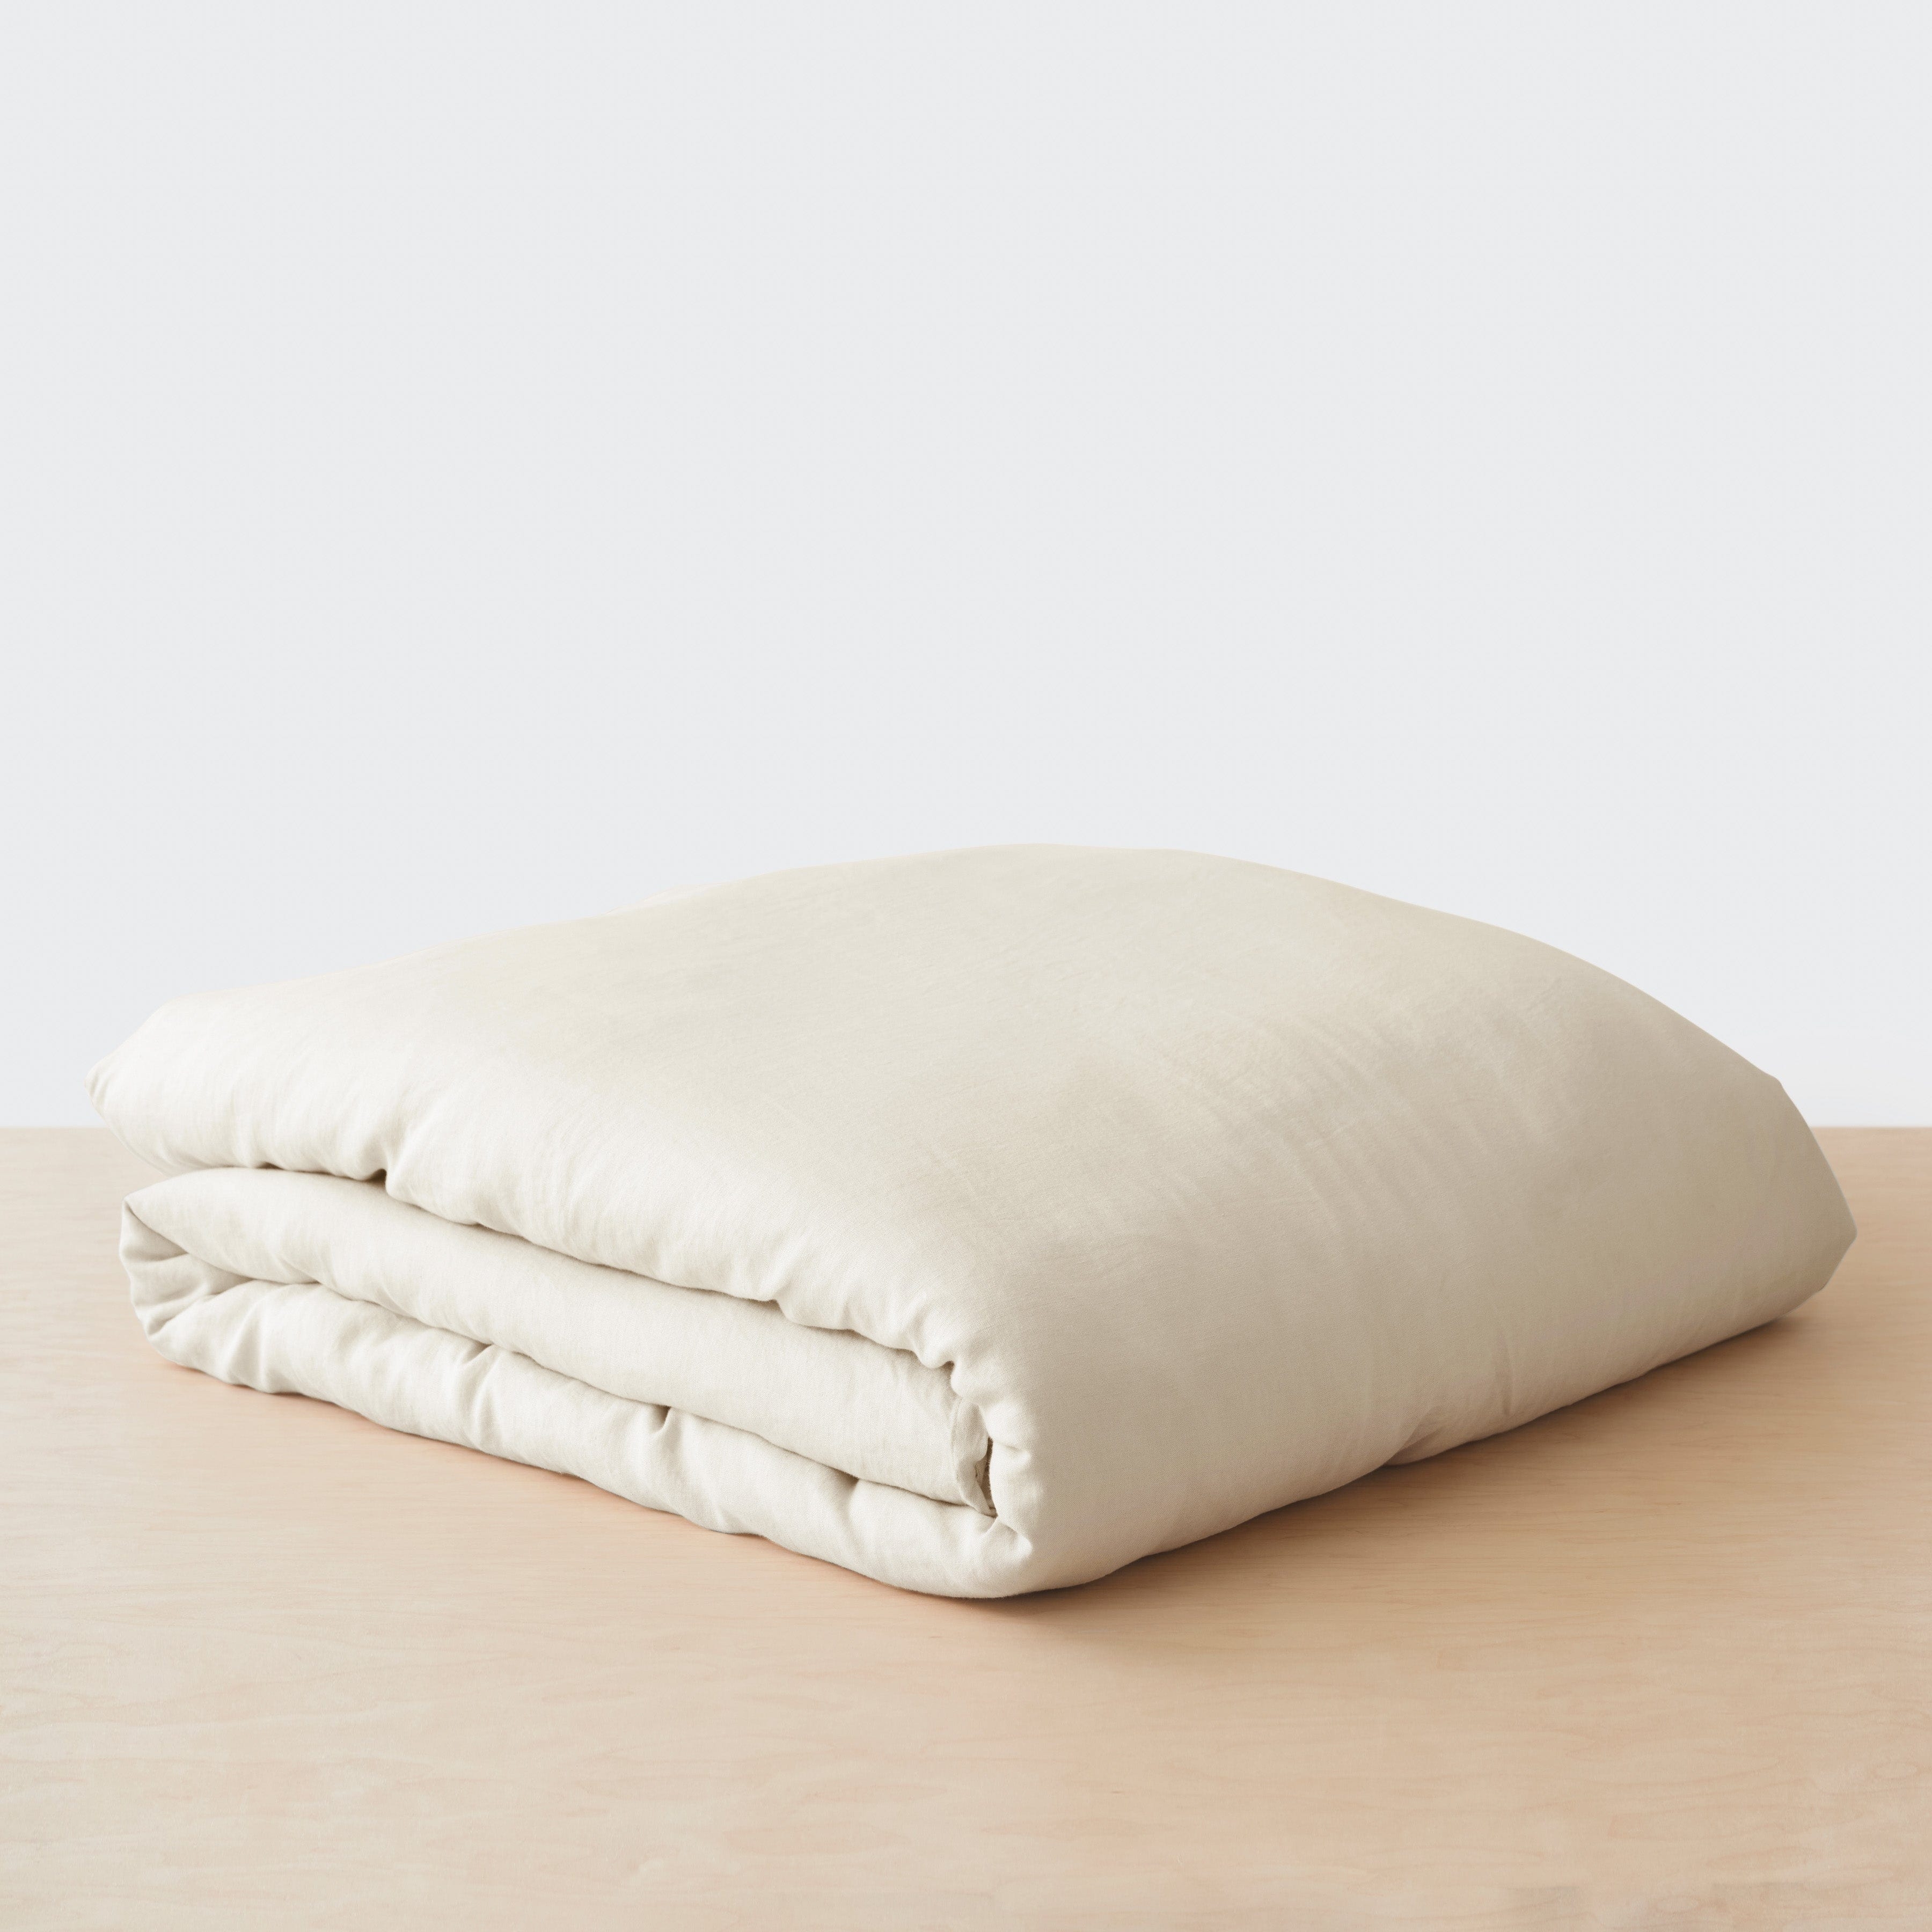 The Citizenry Stonewashed Linen Duvet Cover | Full/Queen | Duvet Only | Ivory - Image 4